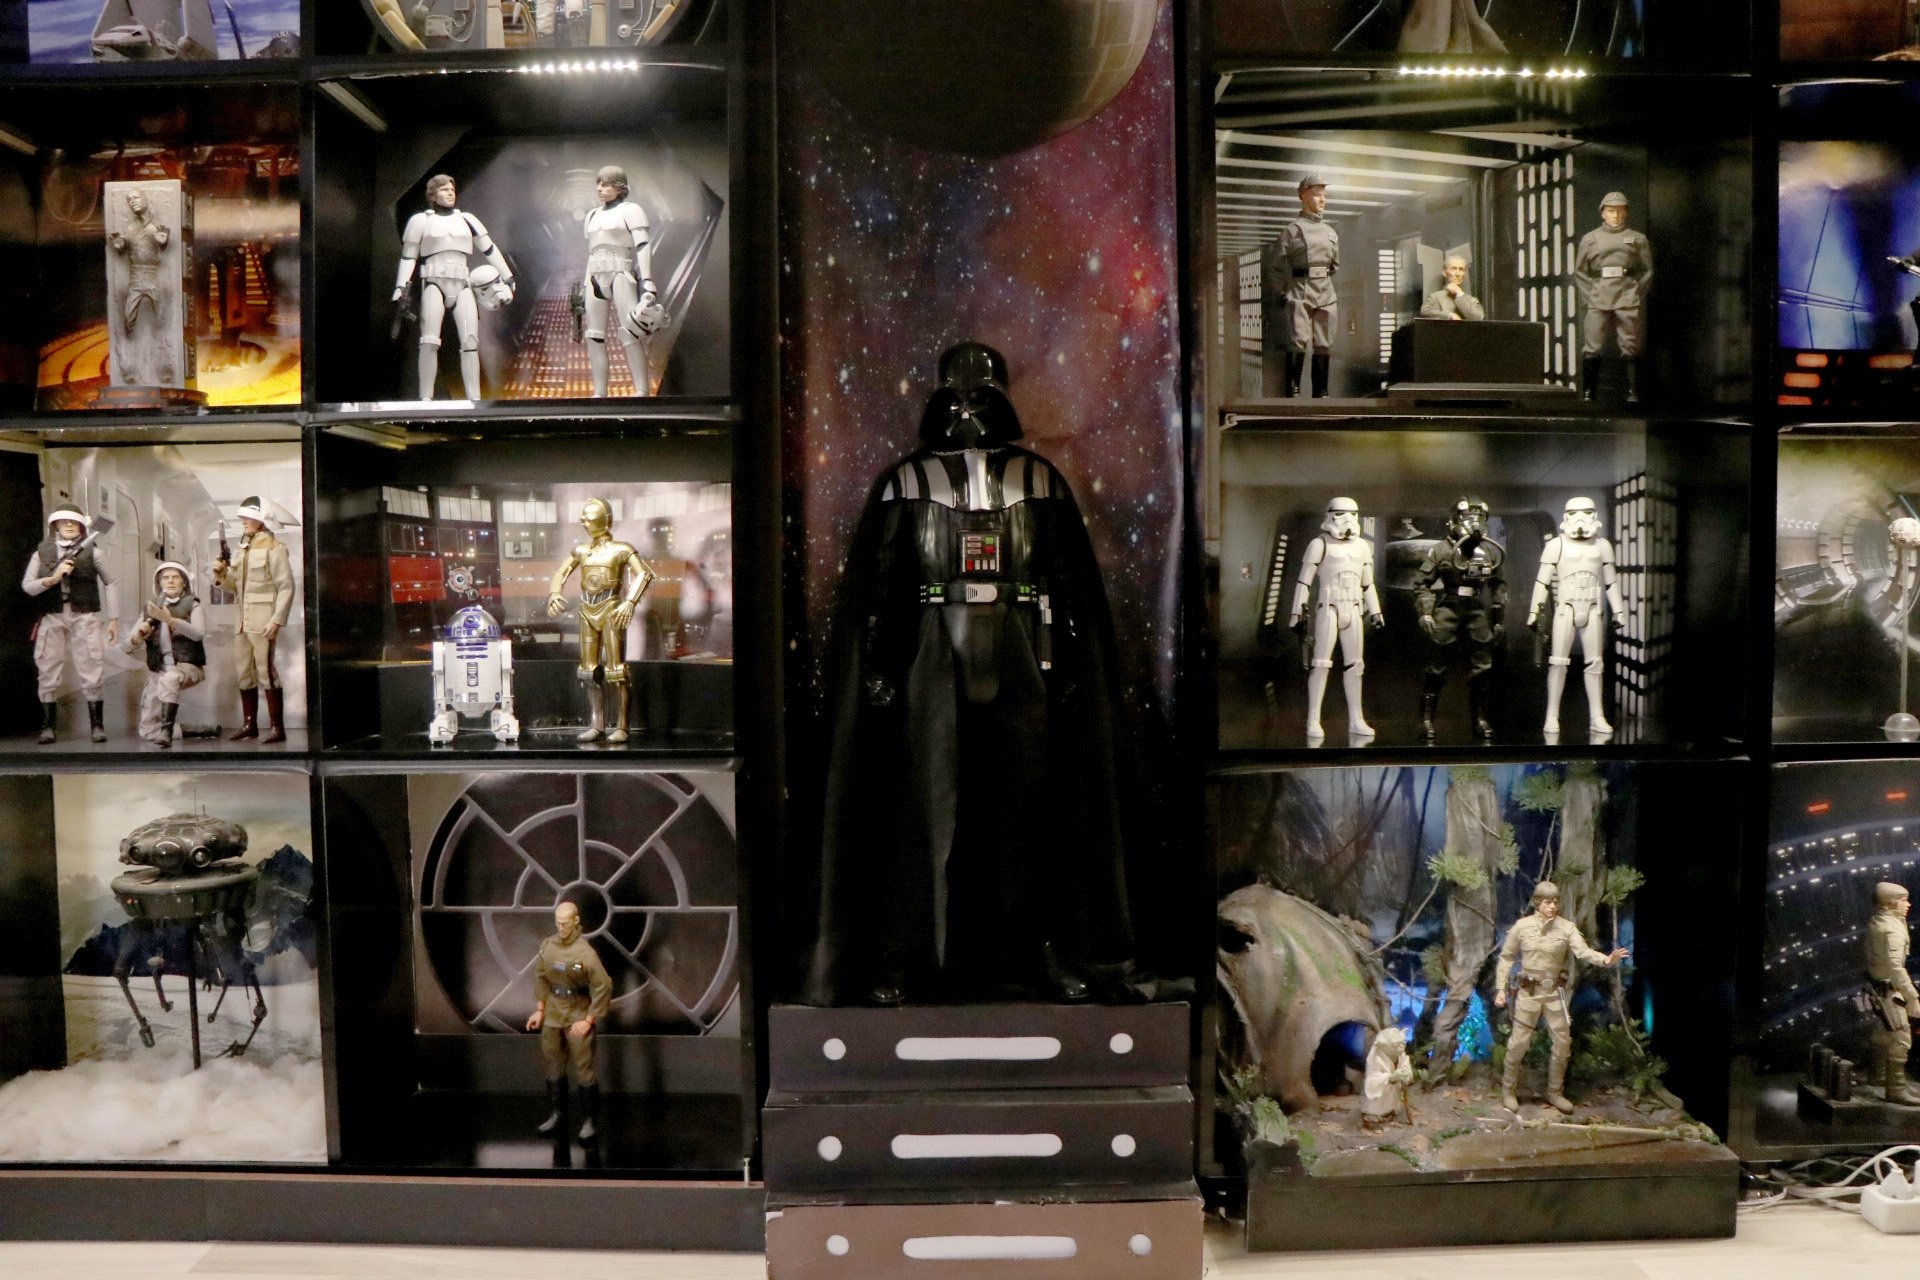 The pieces of the collection exhibited by Cihat Uygun in the 'Star Wars' museum in the living room of his house, Edirne, Turkey, Feb. 24, 2022. (DHA PHOTO)